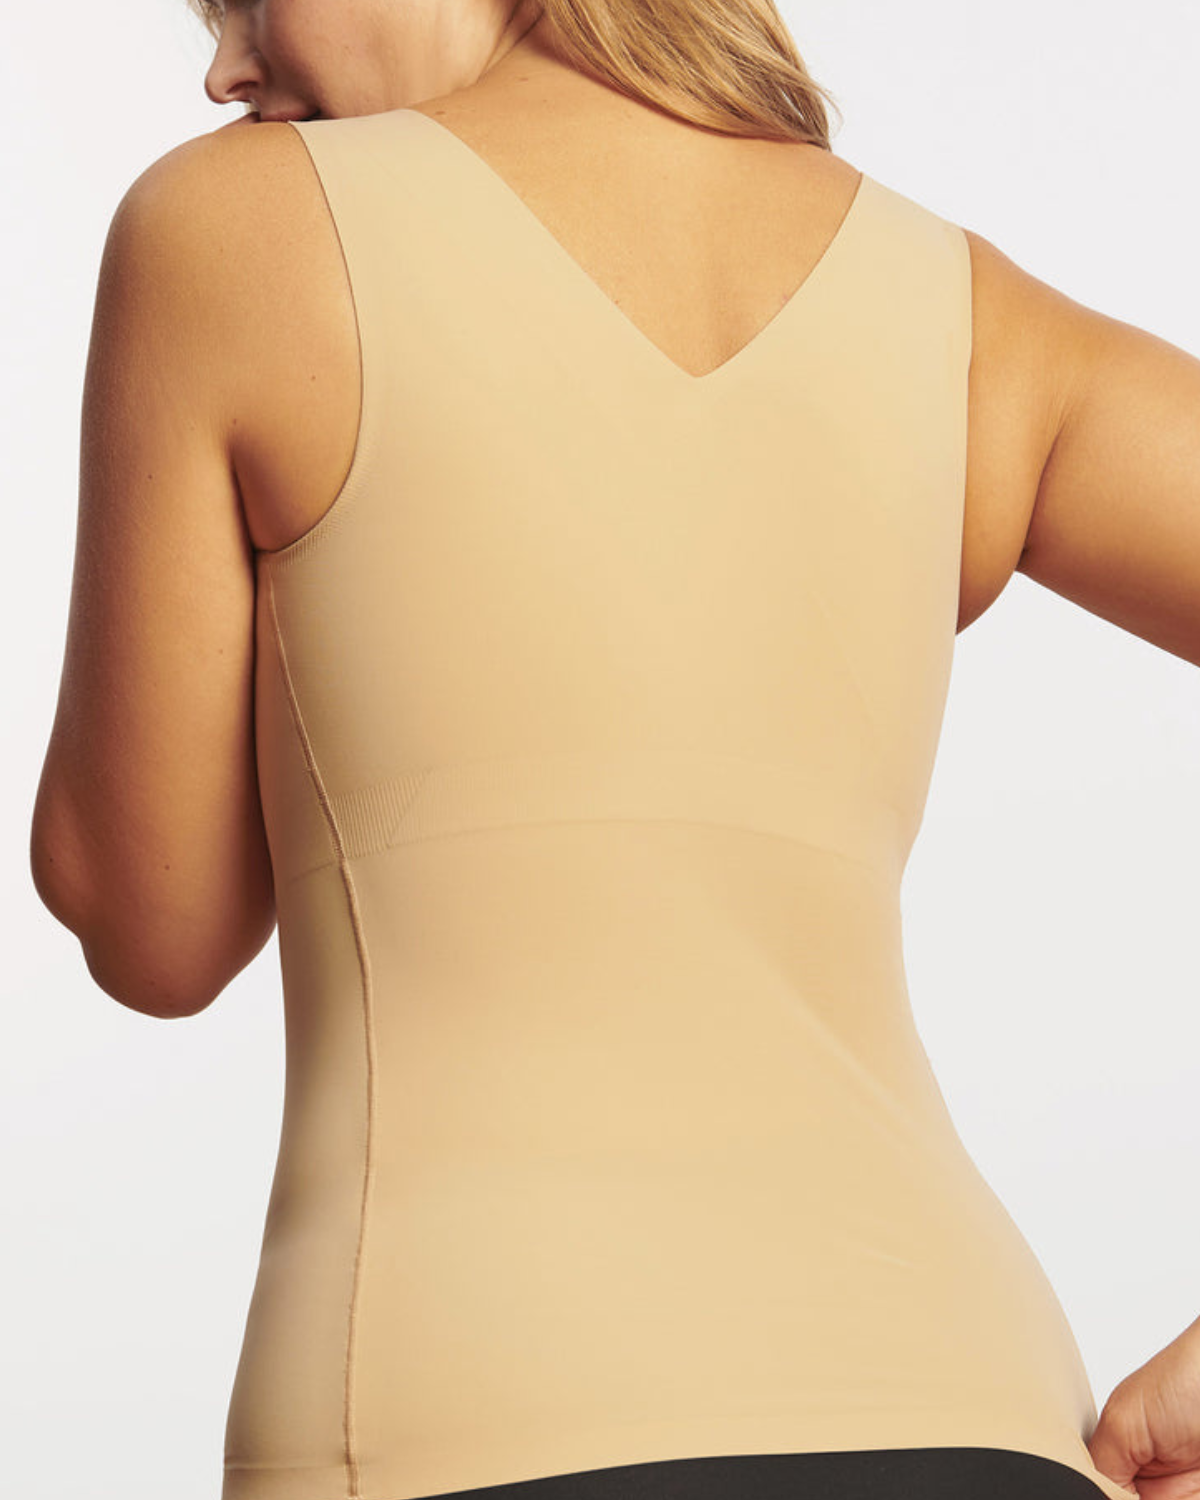 Model on white backdrop wearing a smoothing in cami with built in wire-free bra in beige